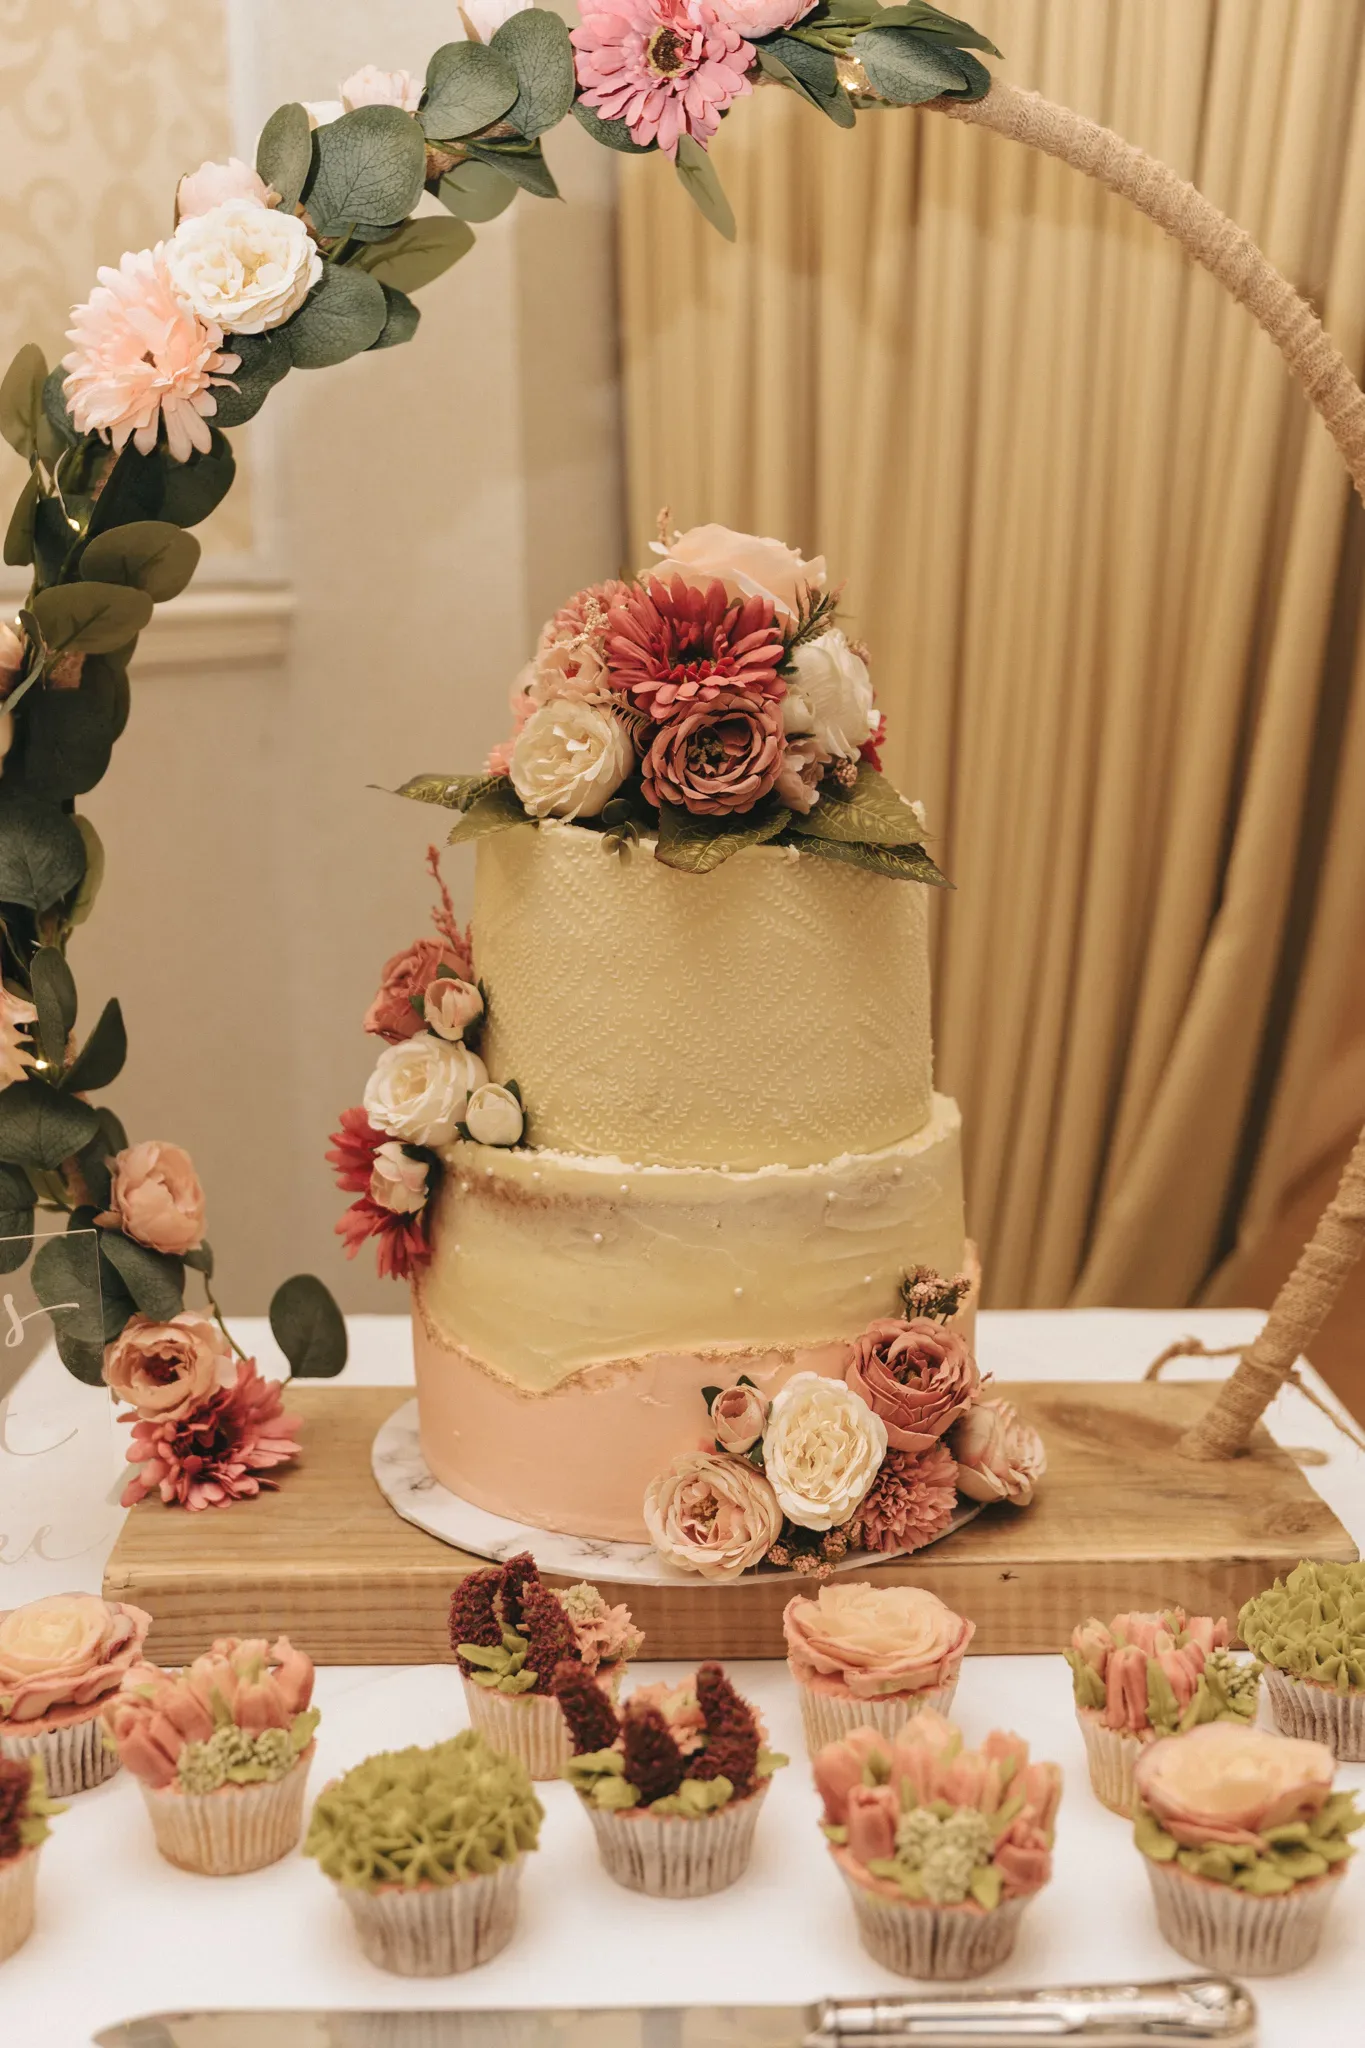 A three-tiered wedding cake adorned with pink and cream flowers, displayed on a table surrounded by matching floral cupcakes, set against a soft, beige backdrop.